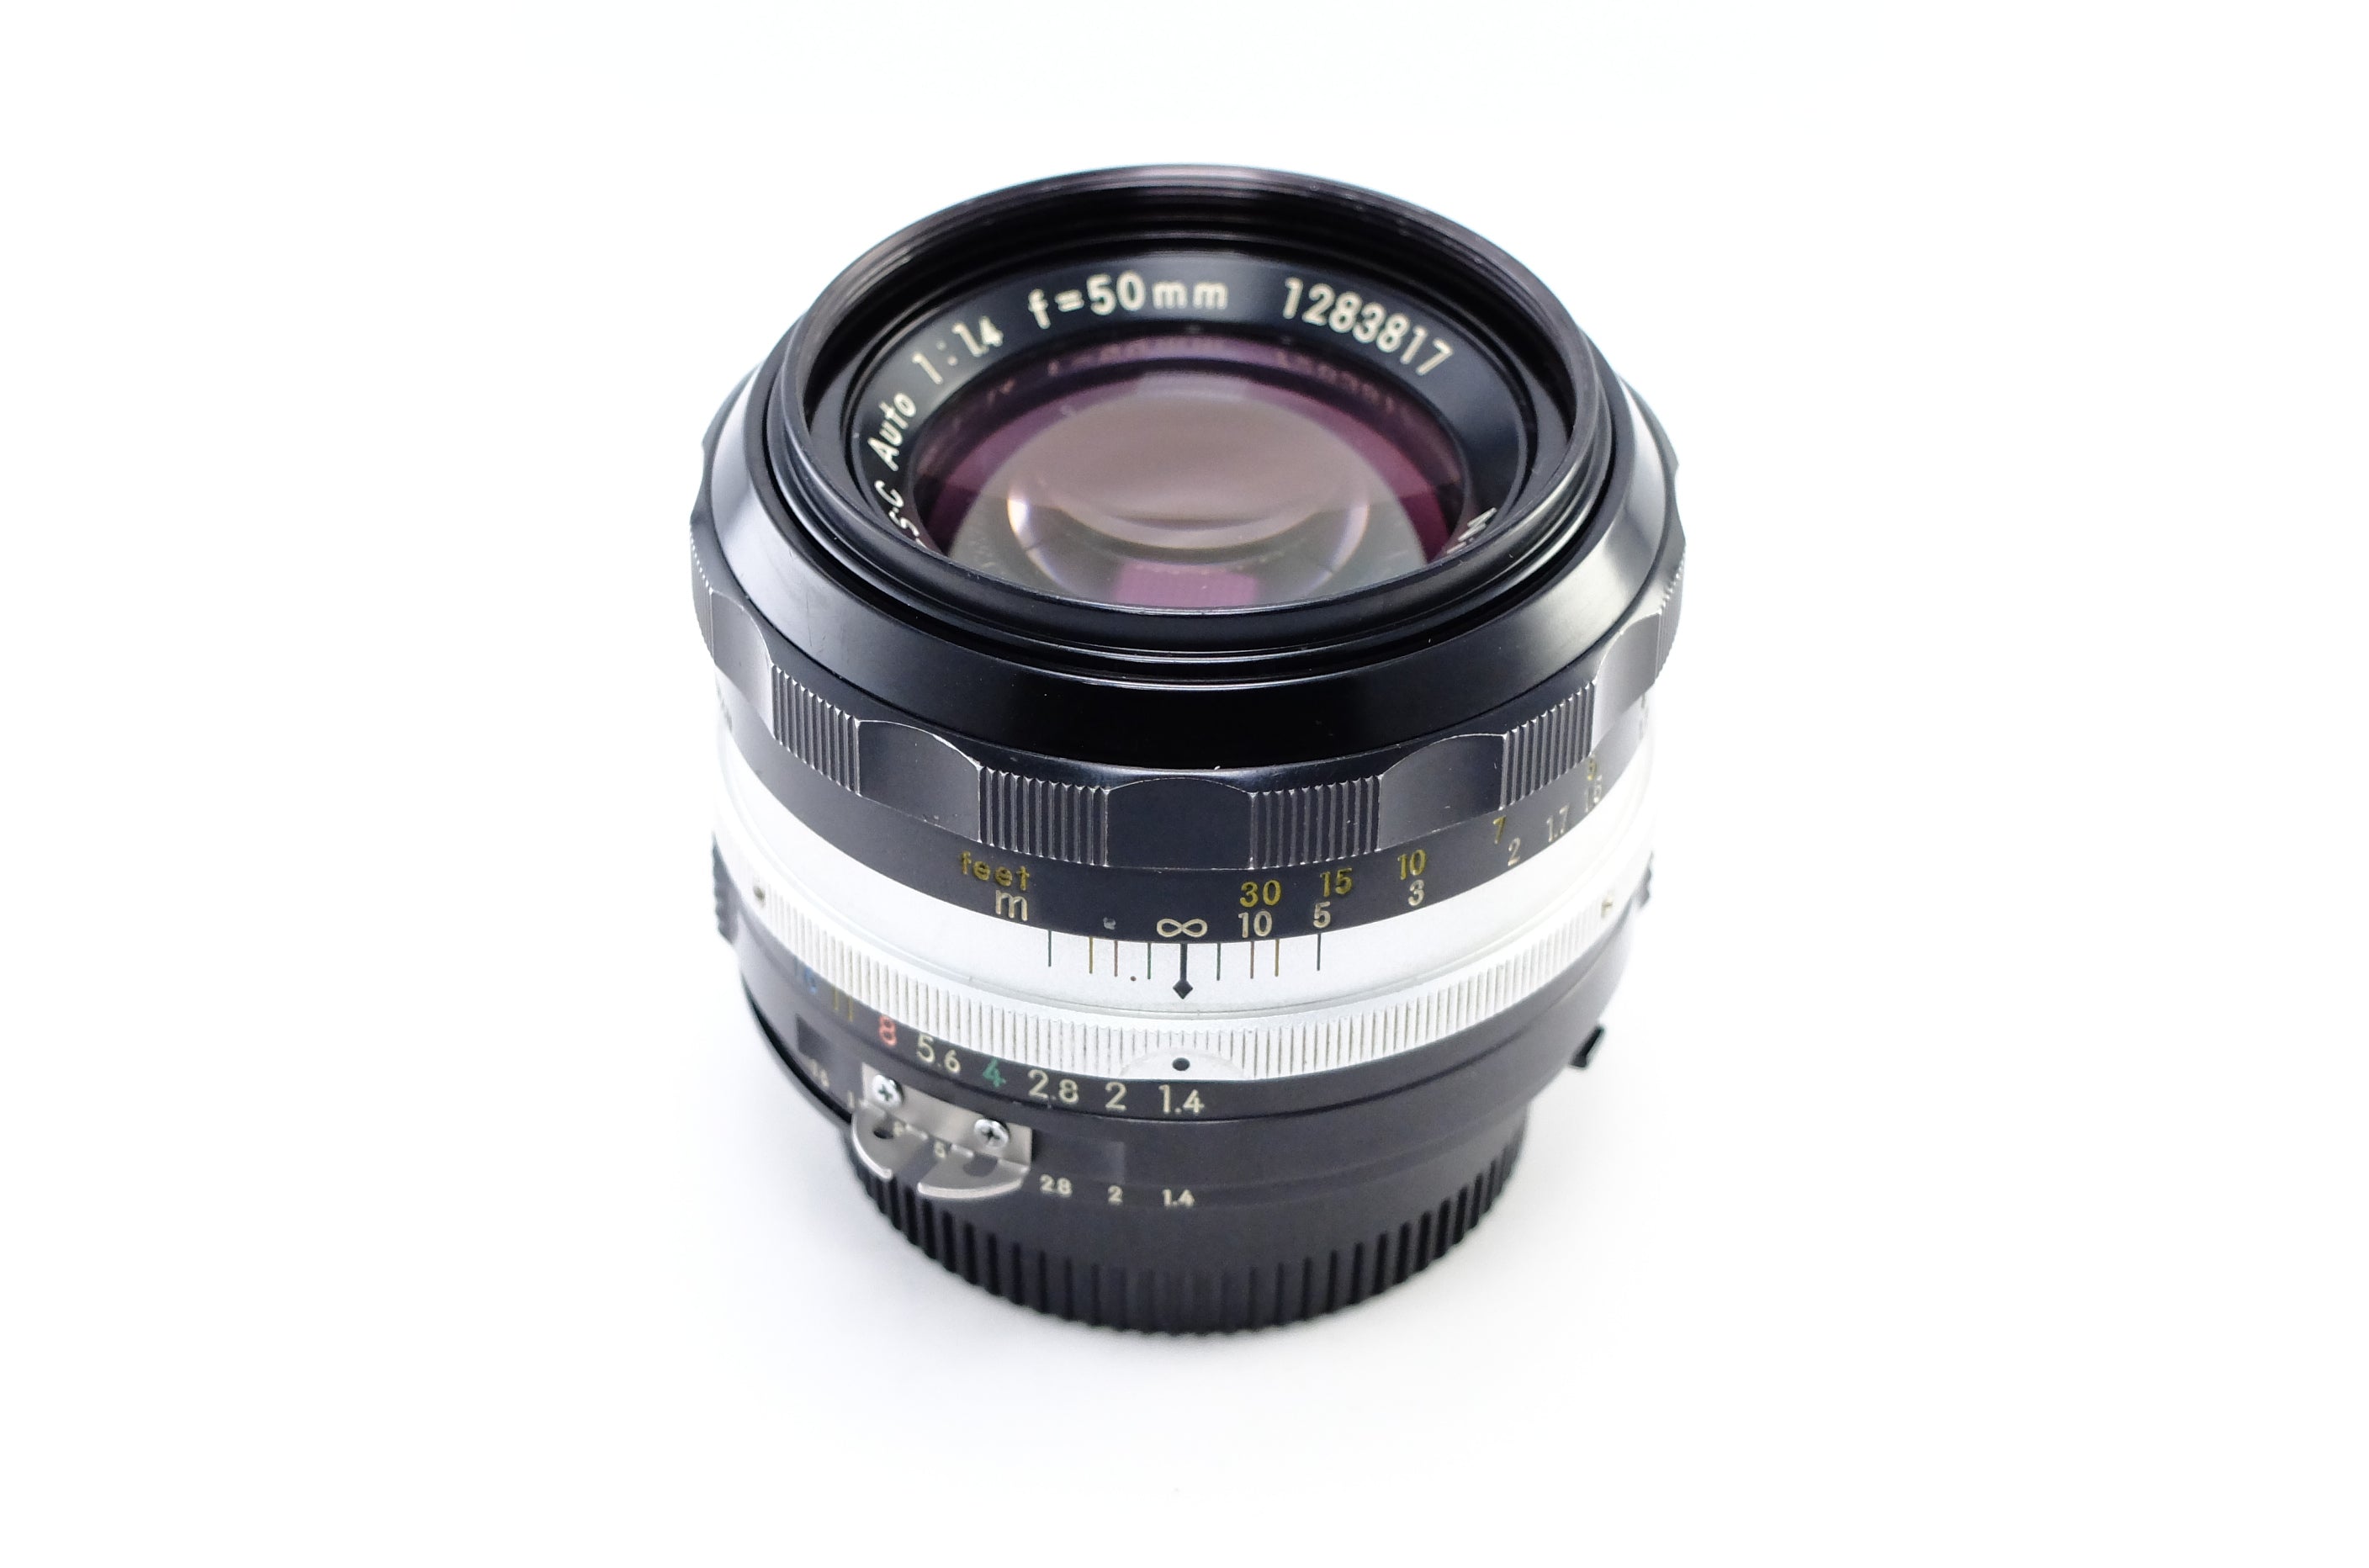 Nikon】NIKKOR-S.C Auto 50mm F1.4 Ai改 OH済み [ニコンFマウント ...